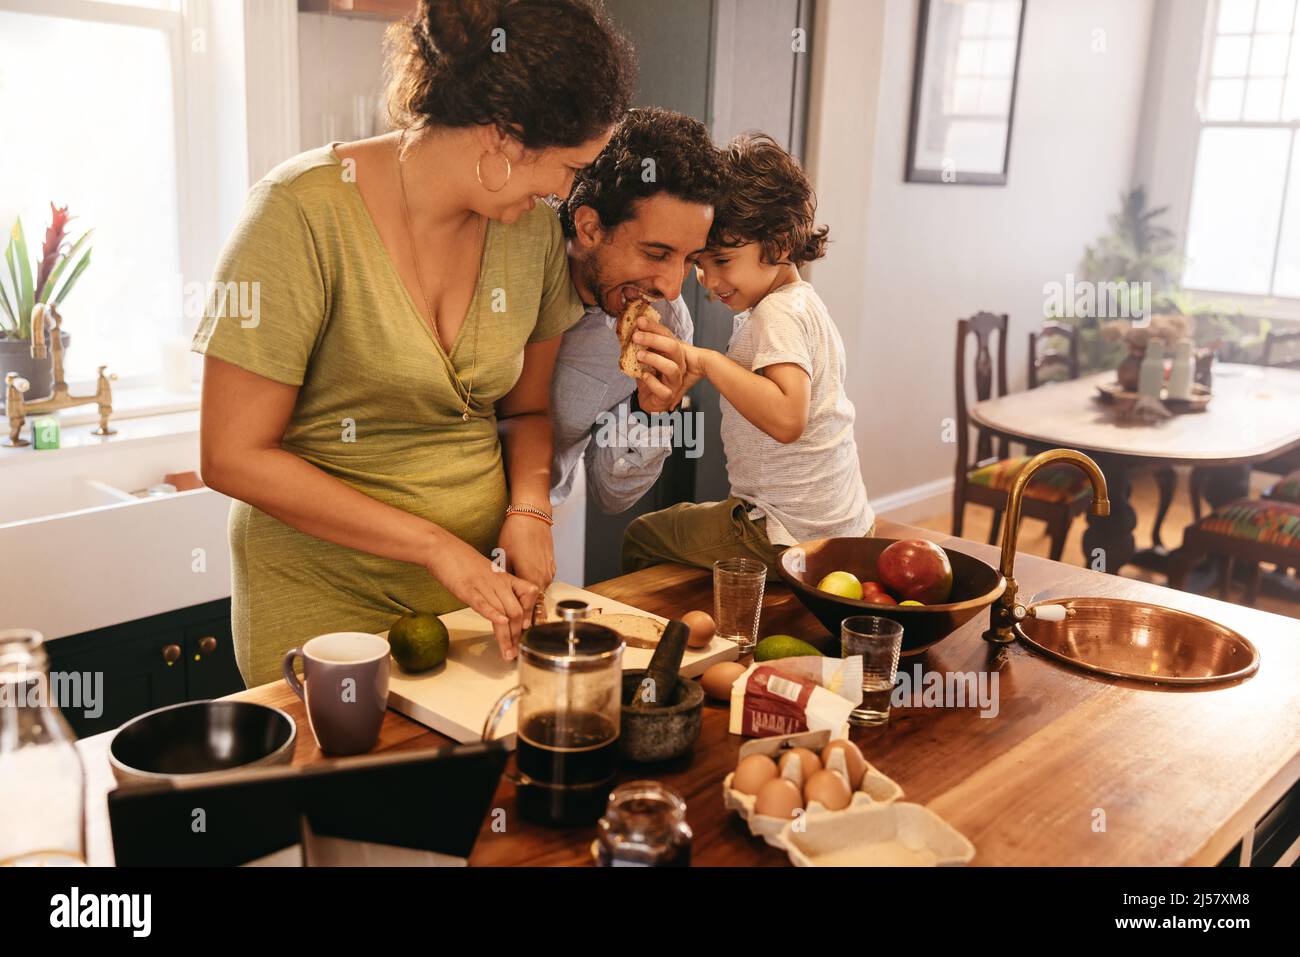 Family of three spending some quality time in the kitchen. Playful dad eating a slice of bread while his wife makes breakfast. Young family having fun Stock Photo